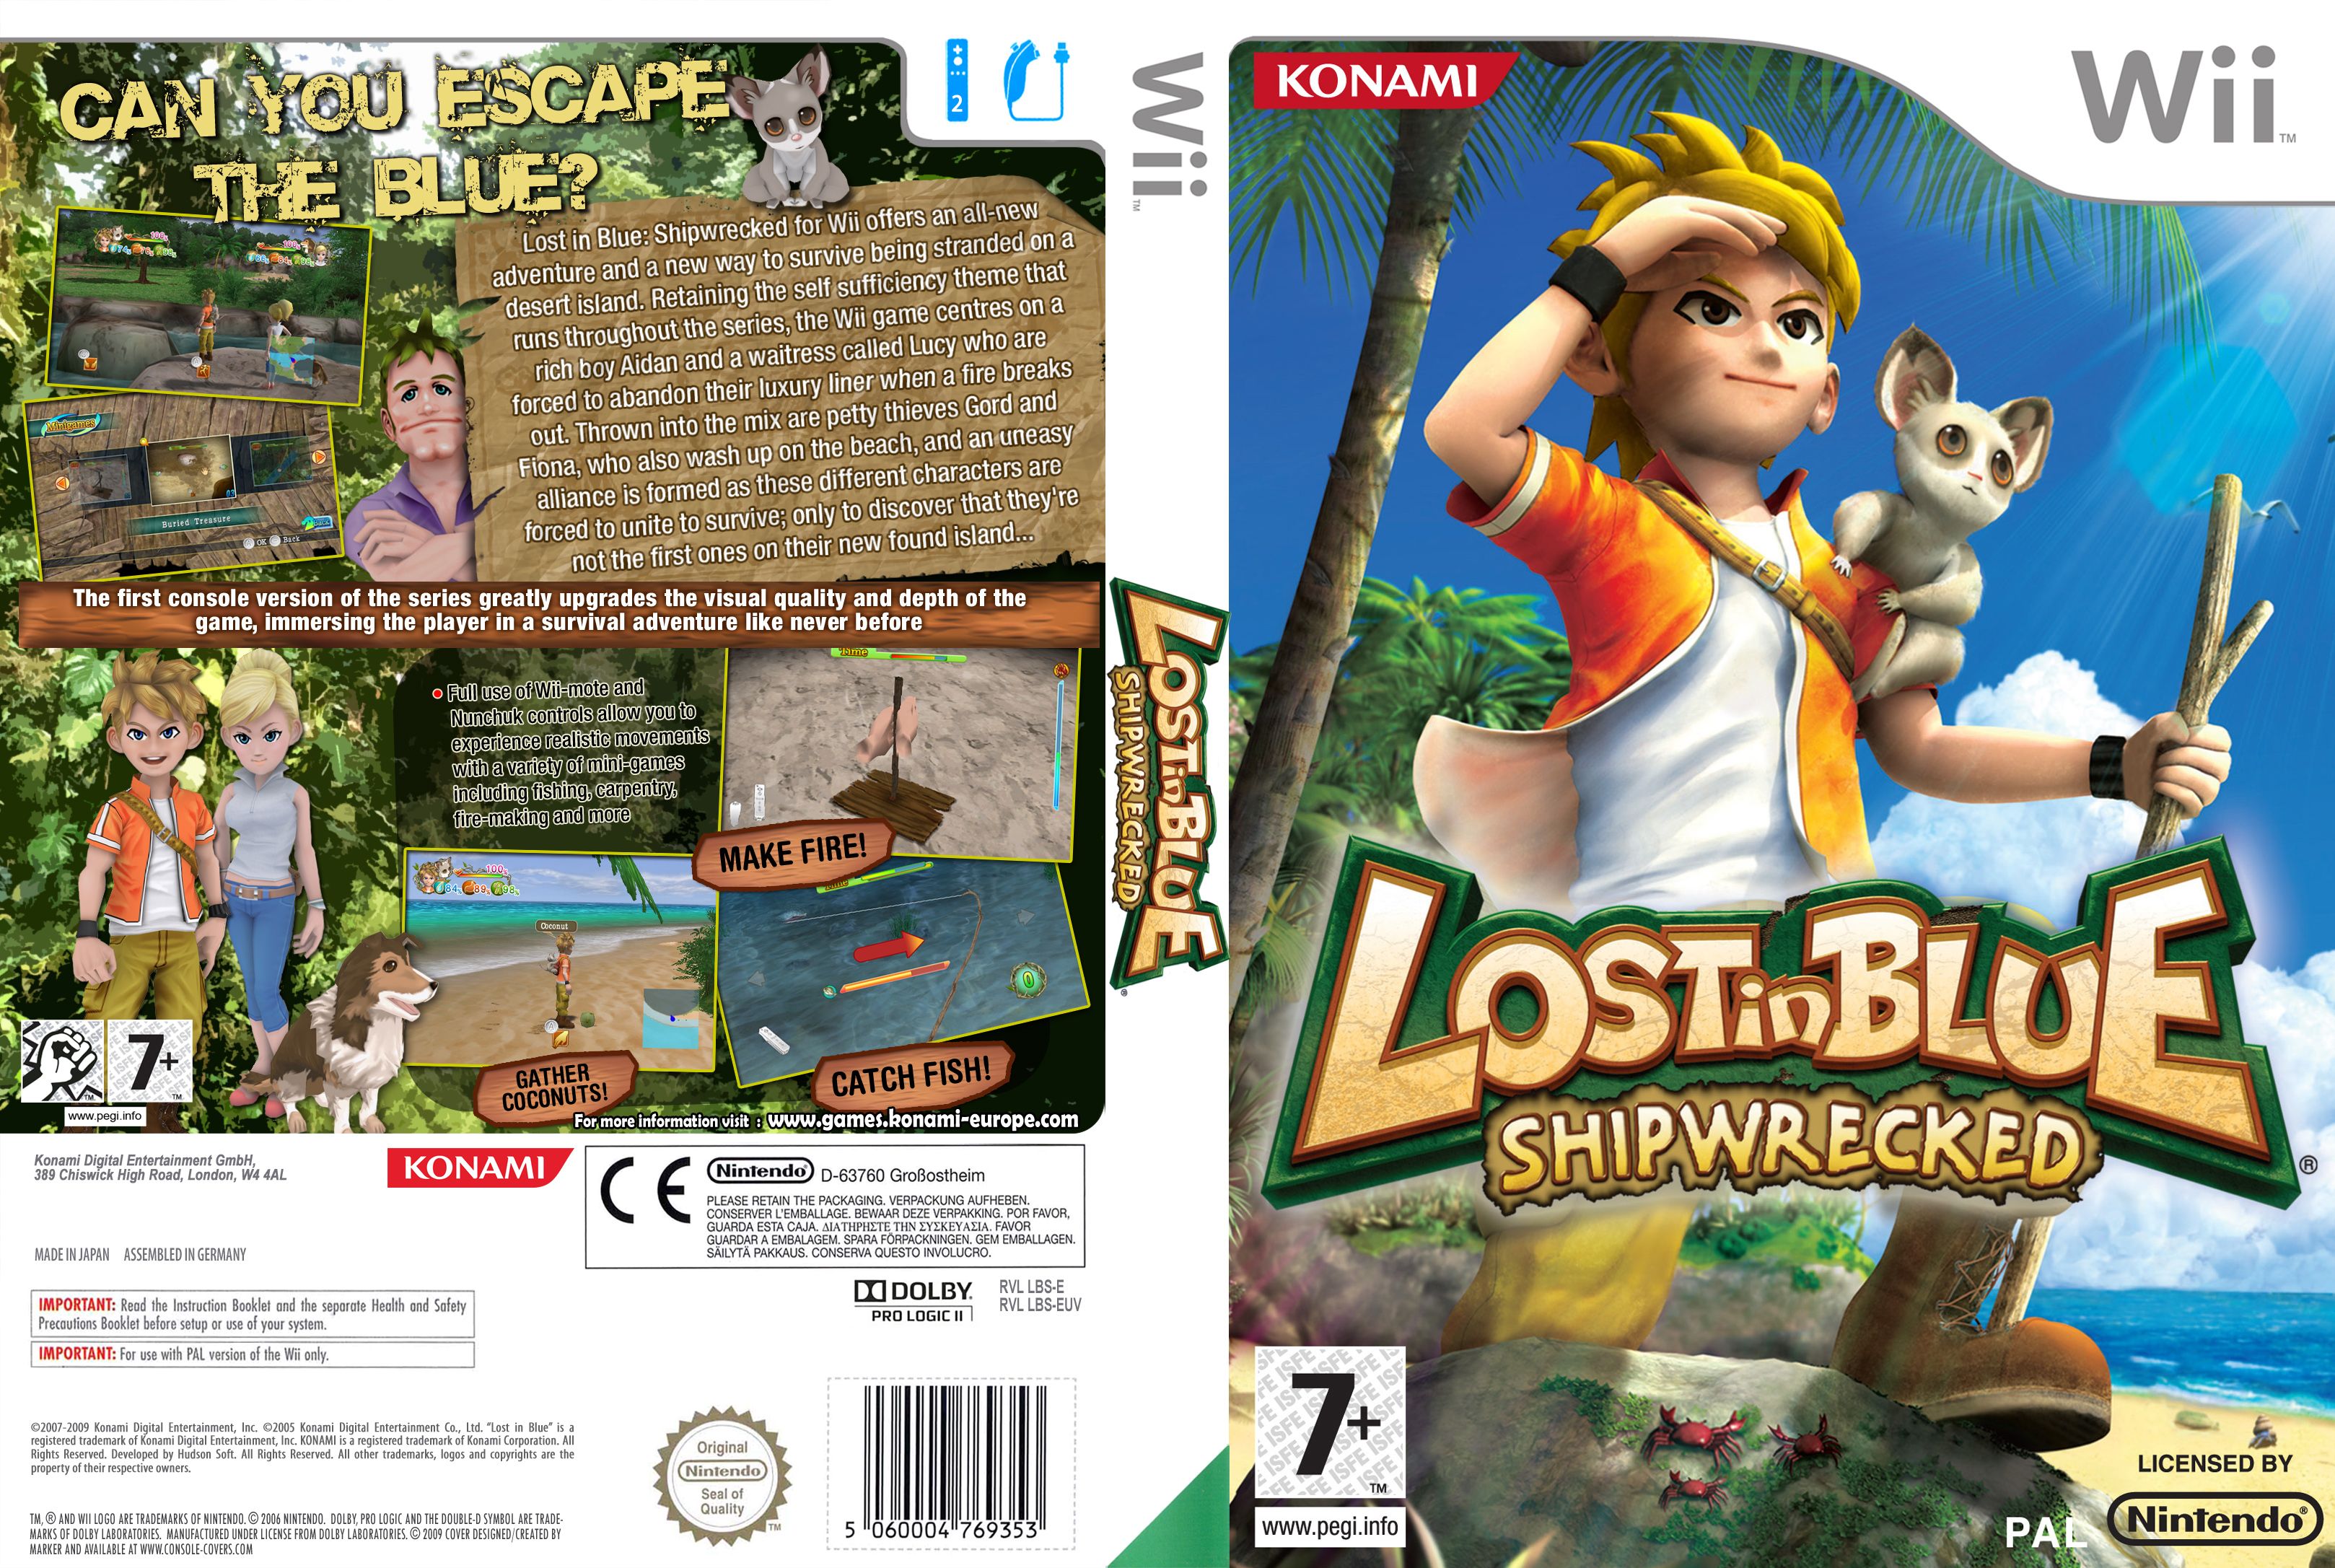 Lost In Blue Shipwrecked Pal Wii Full Wii Covers Cover Century Over 500 000 Album Art Covers For Free